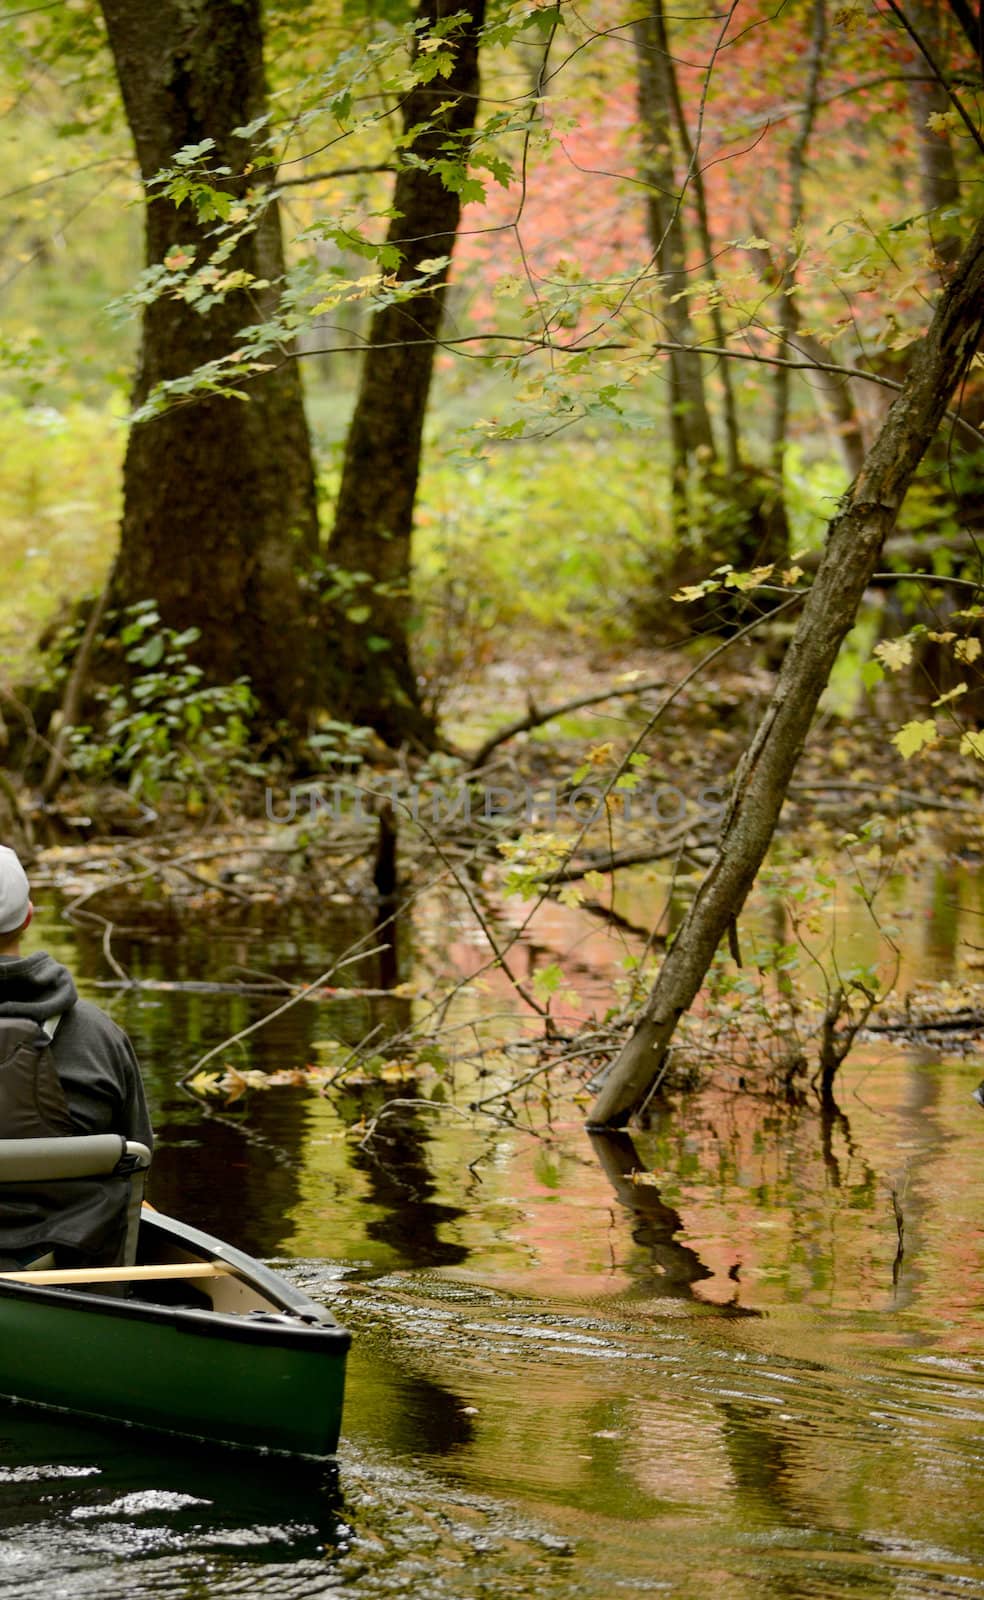 kayak during fall in nature in Maine by ftlaudgirl